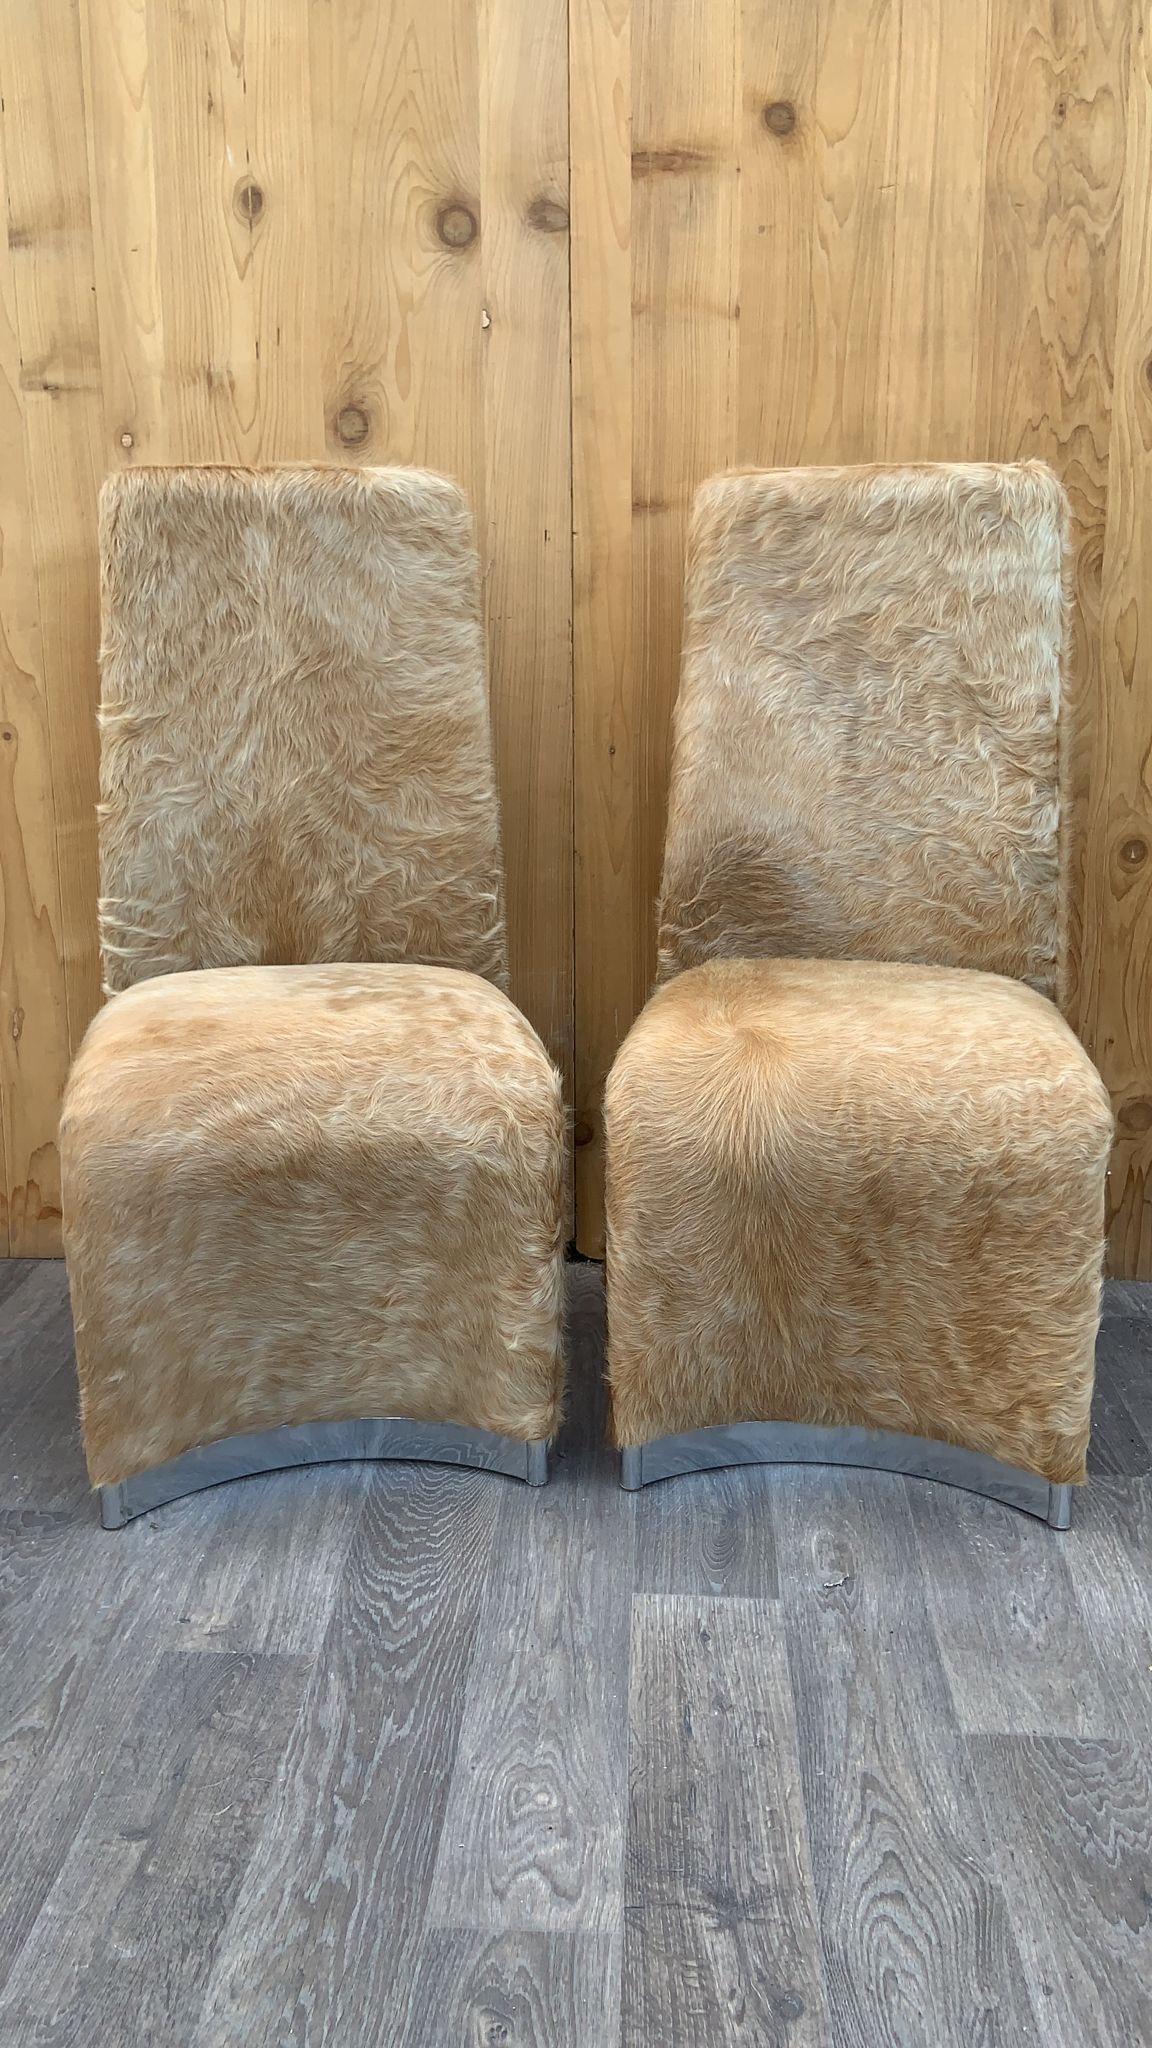 Post Modern DIA Ribbon Side Chairs with Chrome Base Trim Newly Upholstered in Brazilian Palomino Cream Cowhide - Pair 

Circa 1970

Dimentions:

W 19.5”
D 22”
H 42”

Seat H 20”
Seat D 18”
